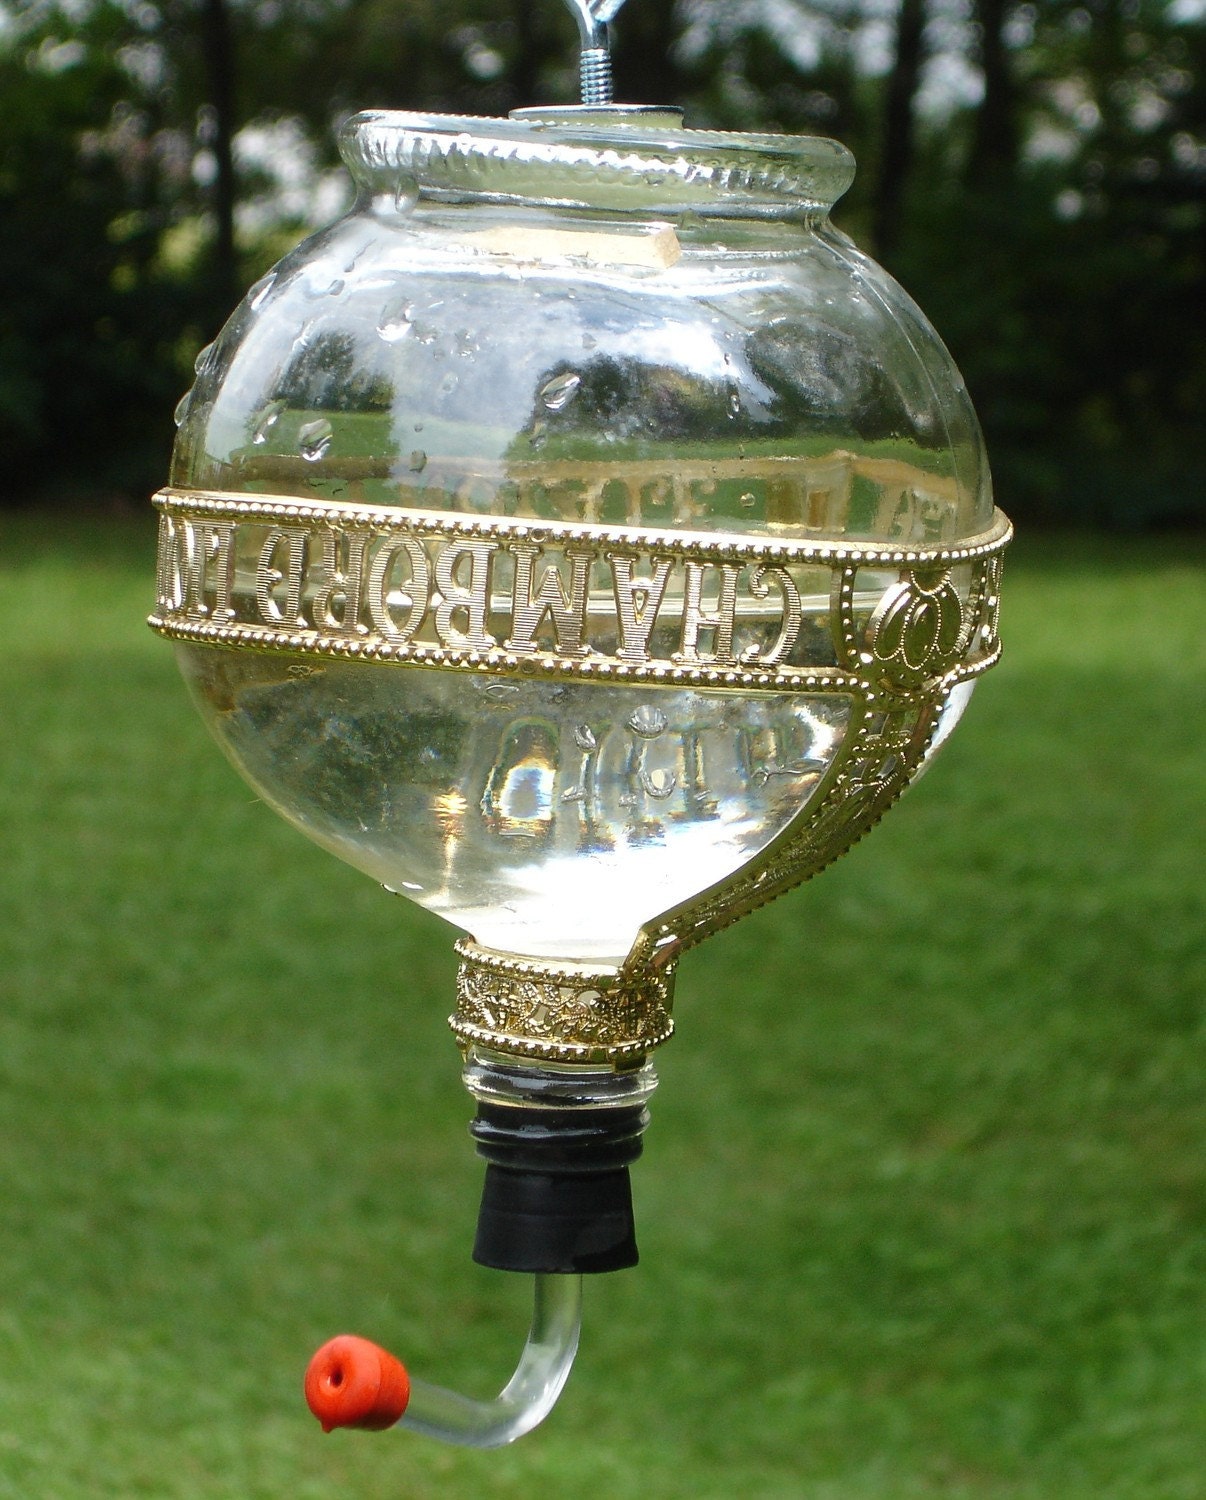 Hummingbird feeder from Recycled Chambord Bottle